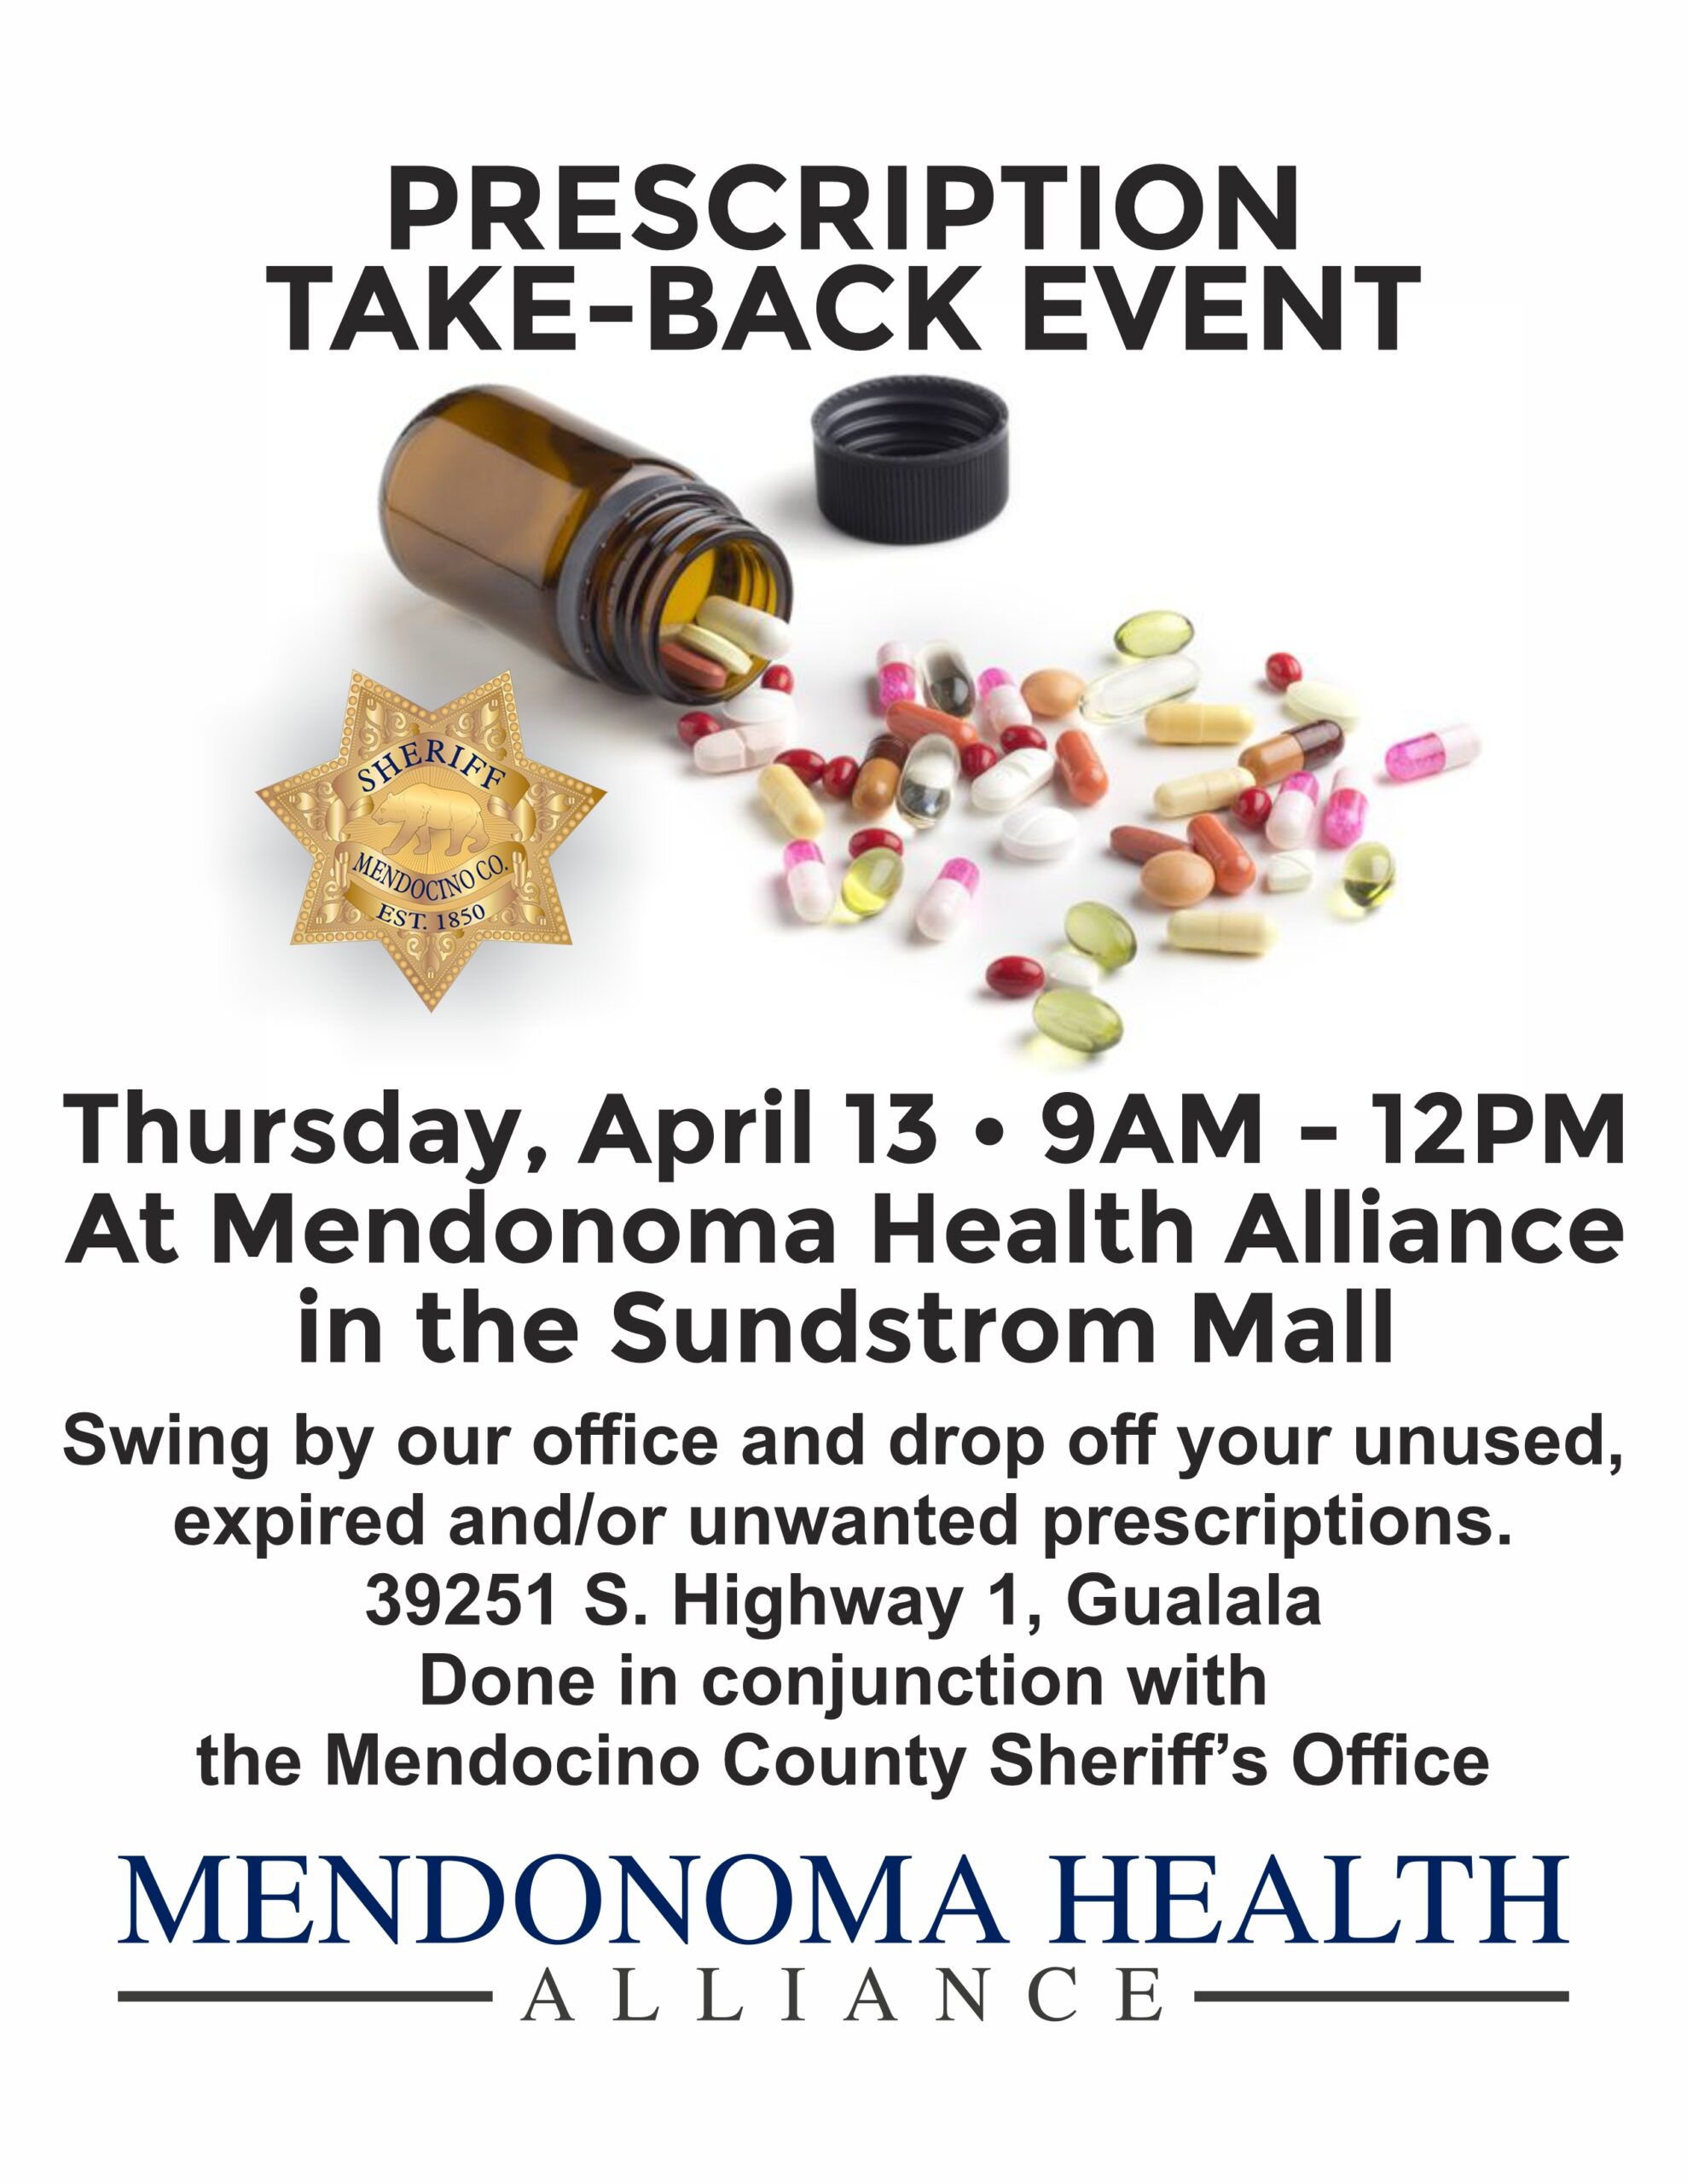 RX Take-Back Flyer with open bottle of spilled pills and sheriff's badge on April 13, 2023 9AM -12PM